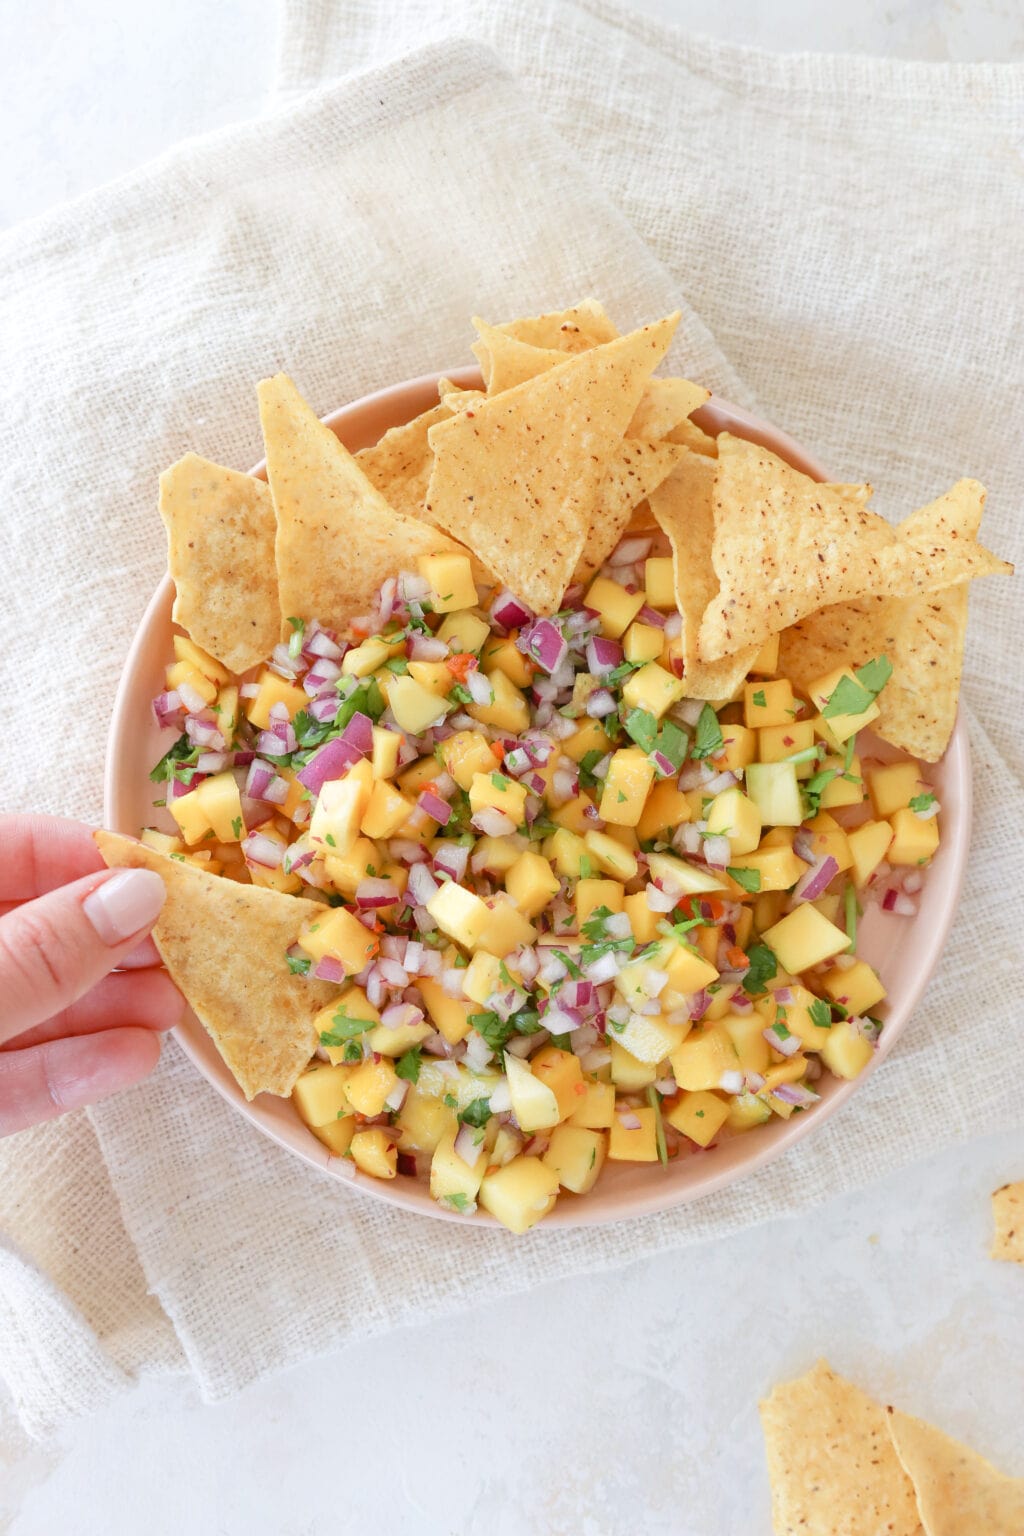 An overhead shot of a pink plate with a rim on top of a beige burlap style napkin. On the plate is a mixed mango salsa that has cubed mango, minced red onion, minced habanero pepper, and cilantro leaves. At the top of the plate is a stack on tortilla chips. A woman's hand is holding a chip and dipping it in the salsa.